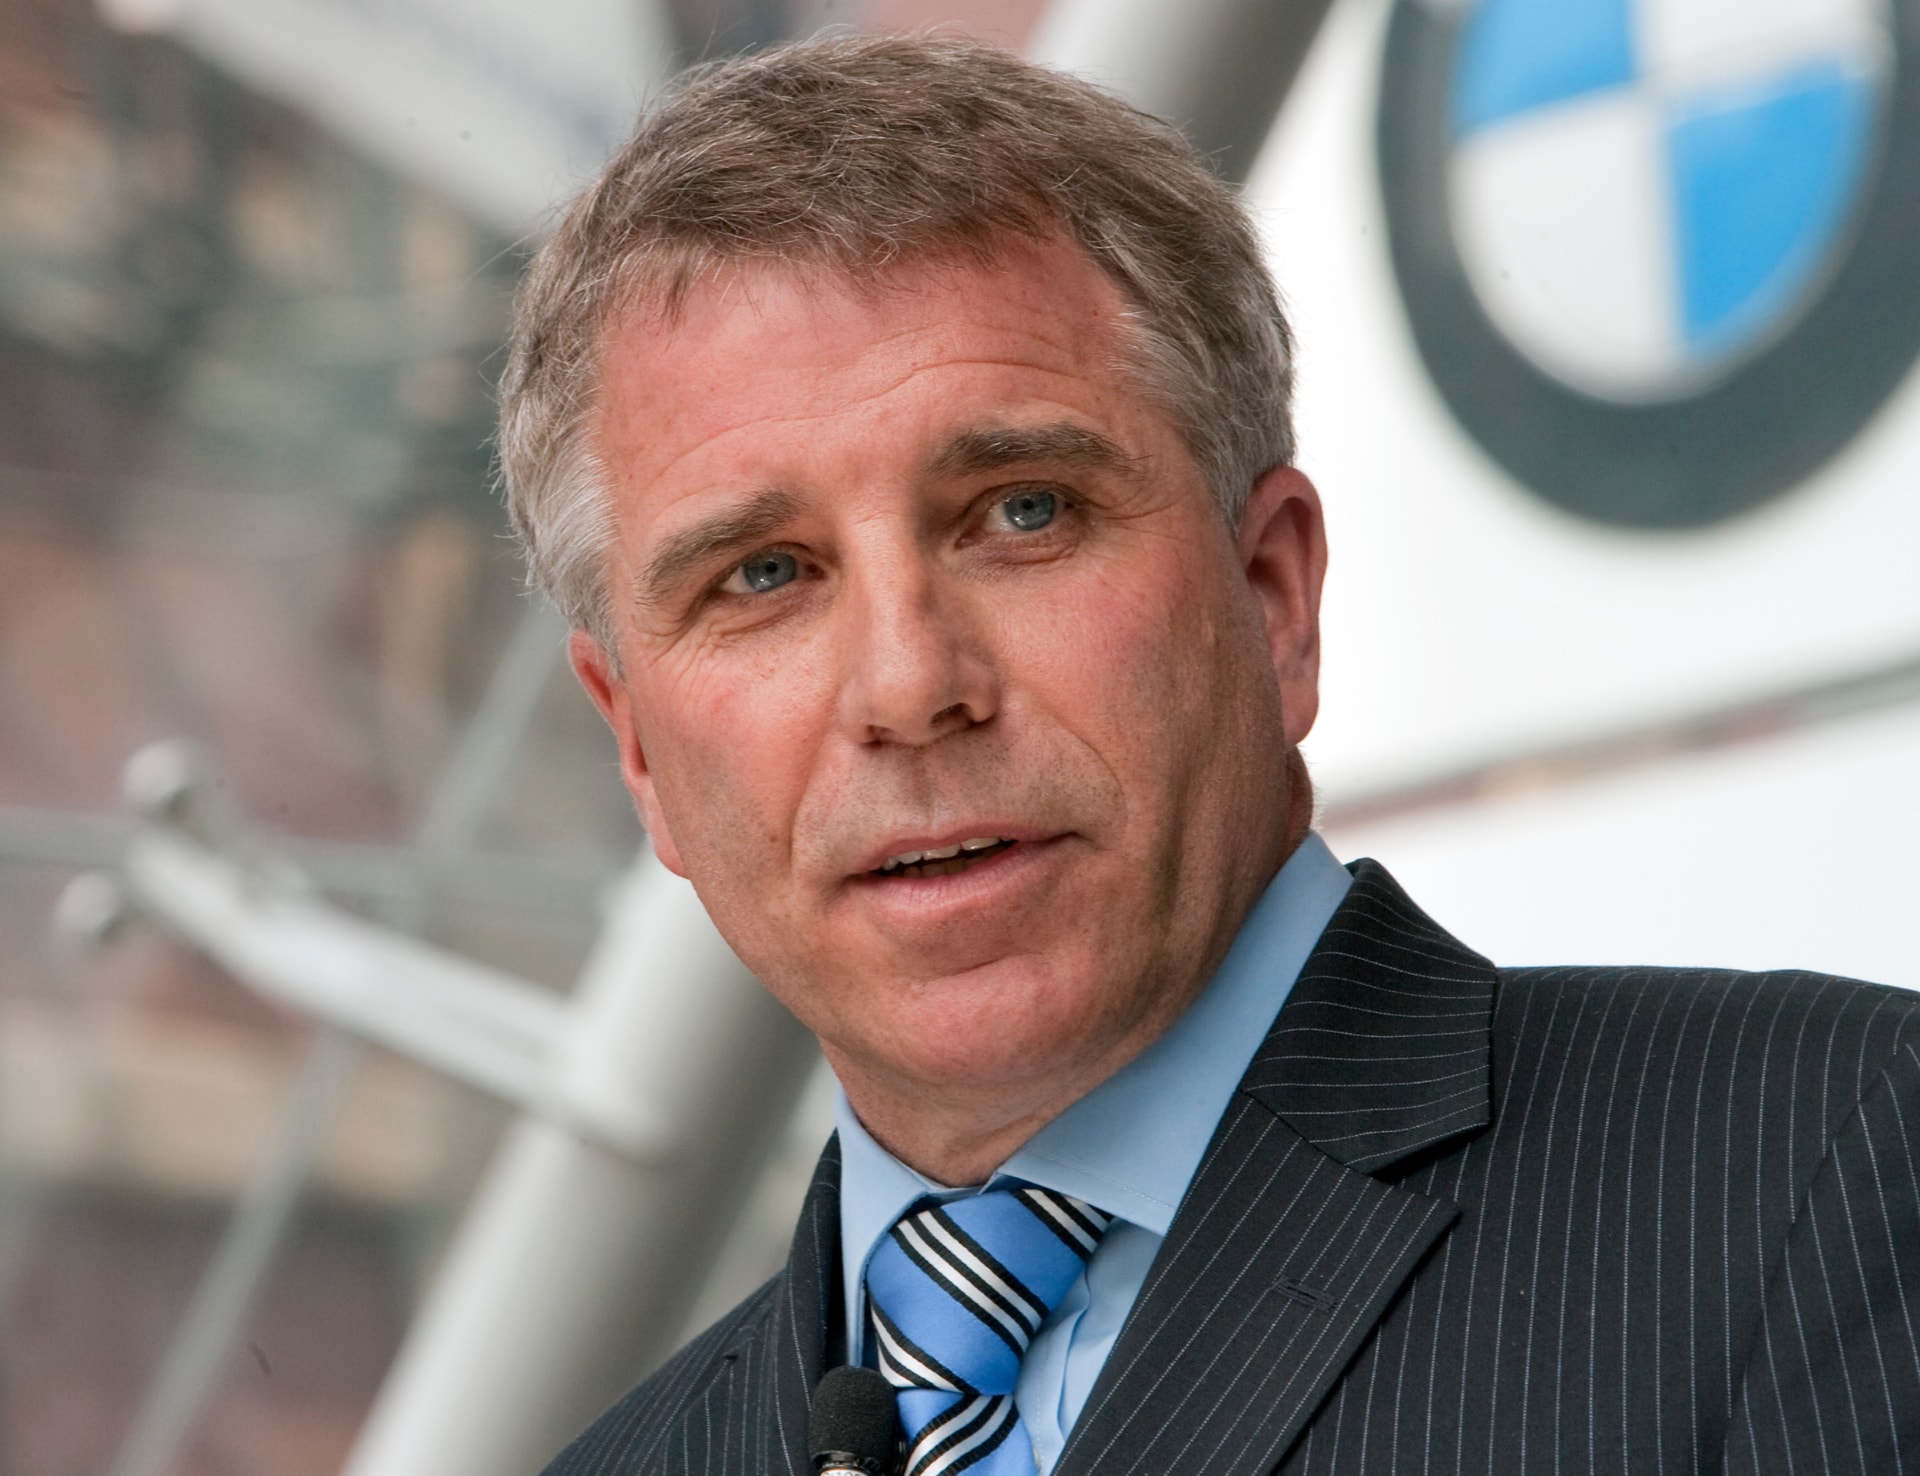 Current president of bmw north america #2